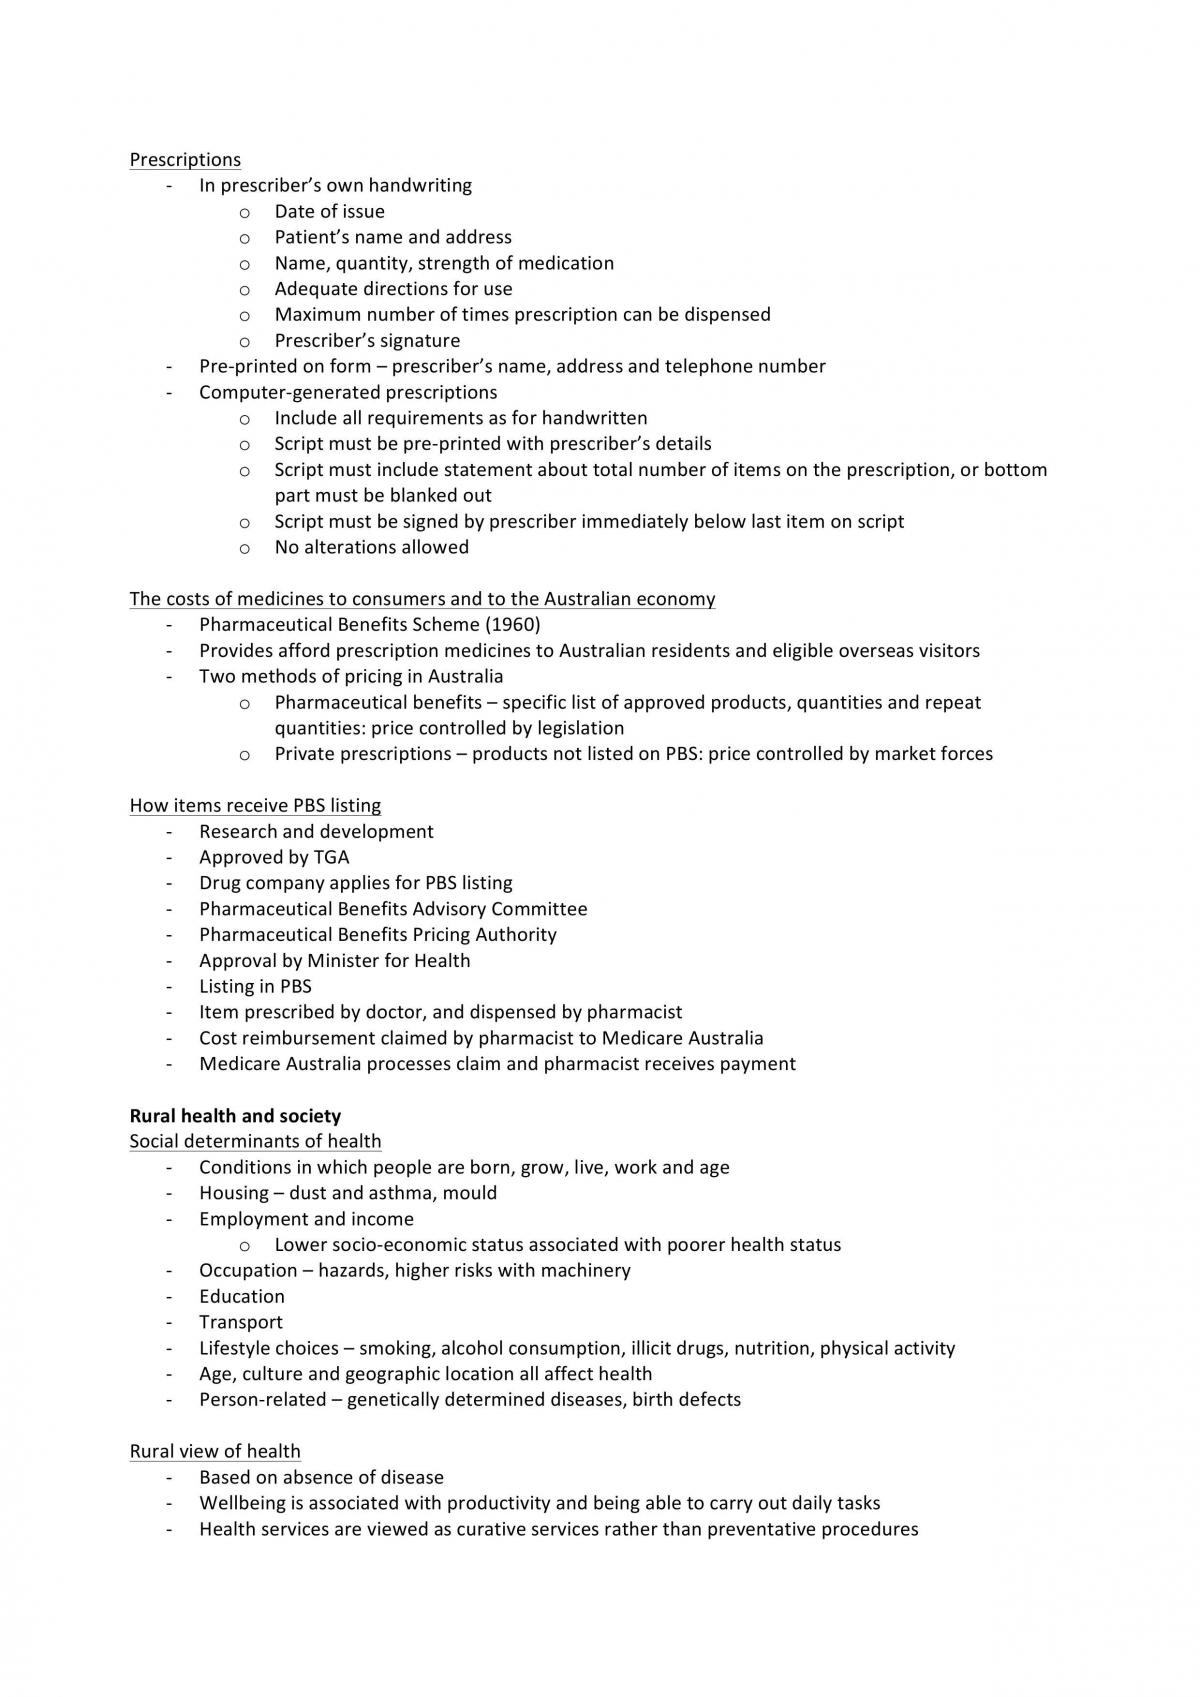 PHAR2812 Full Subject Notes | PHAR2812 - Microbiology and Infection ...